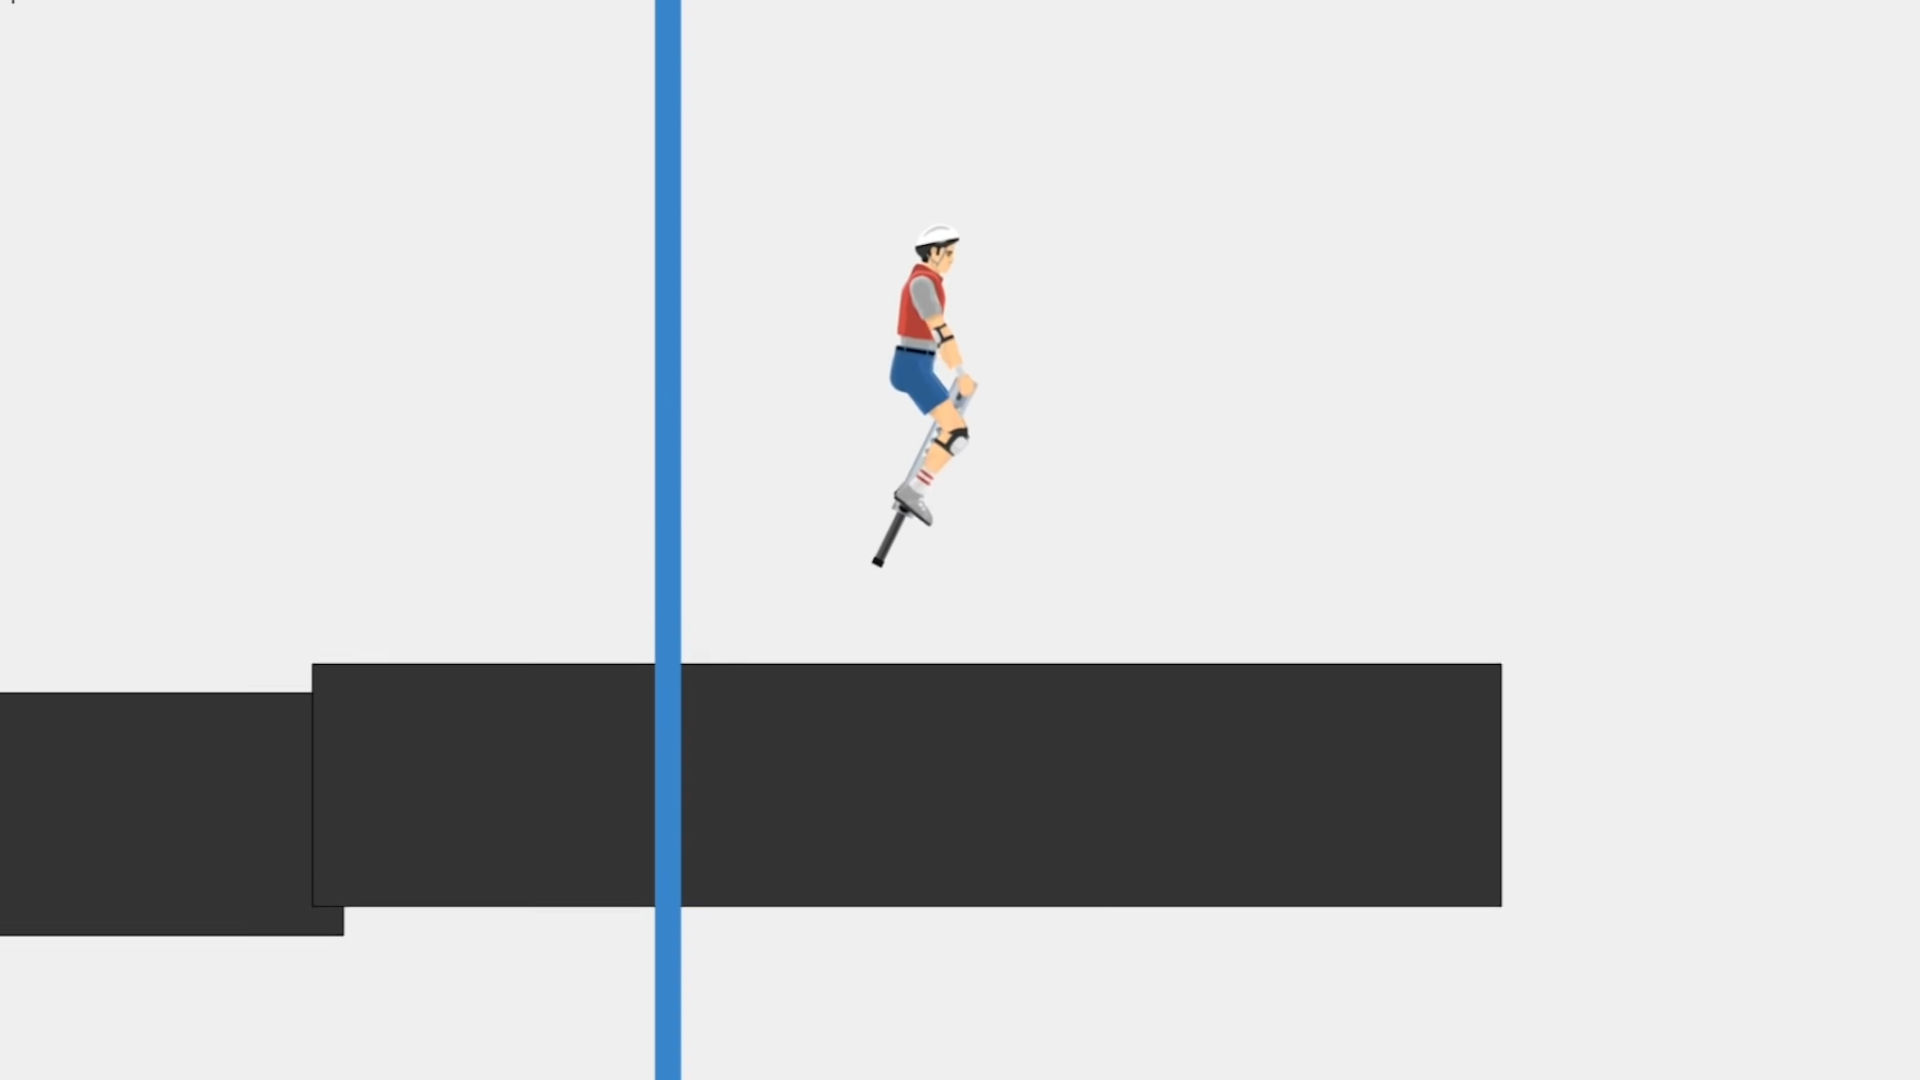 The Happy Wheels hi-vis character jumping along the screen with a pogo stick